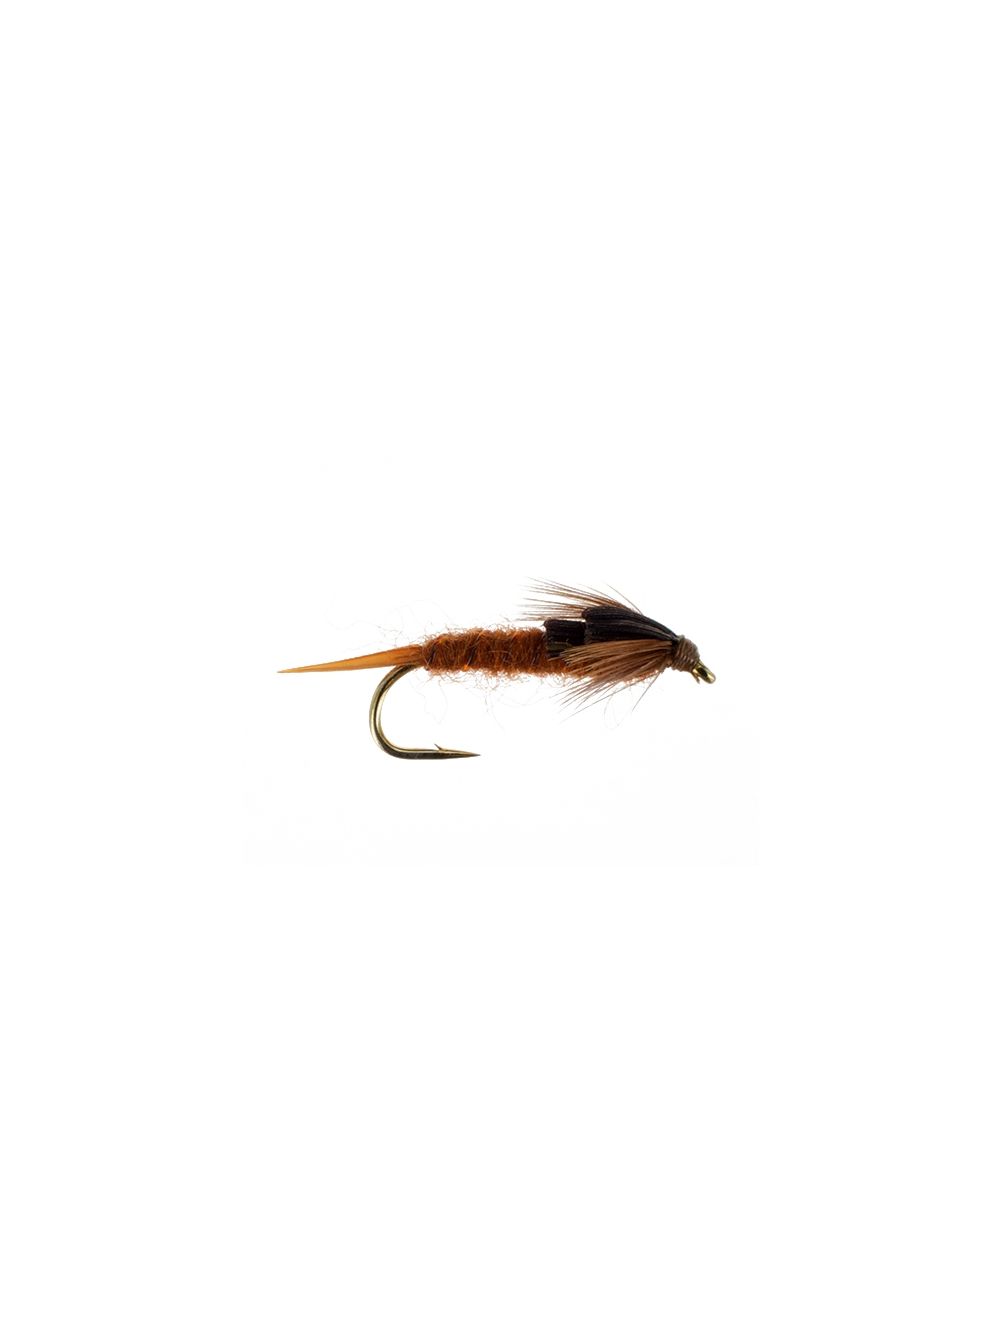 Early Brown Stonefly